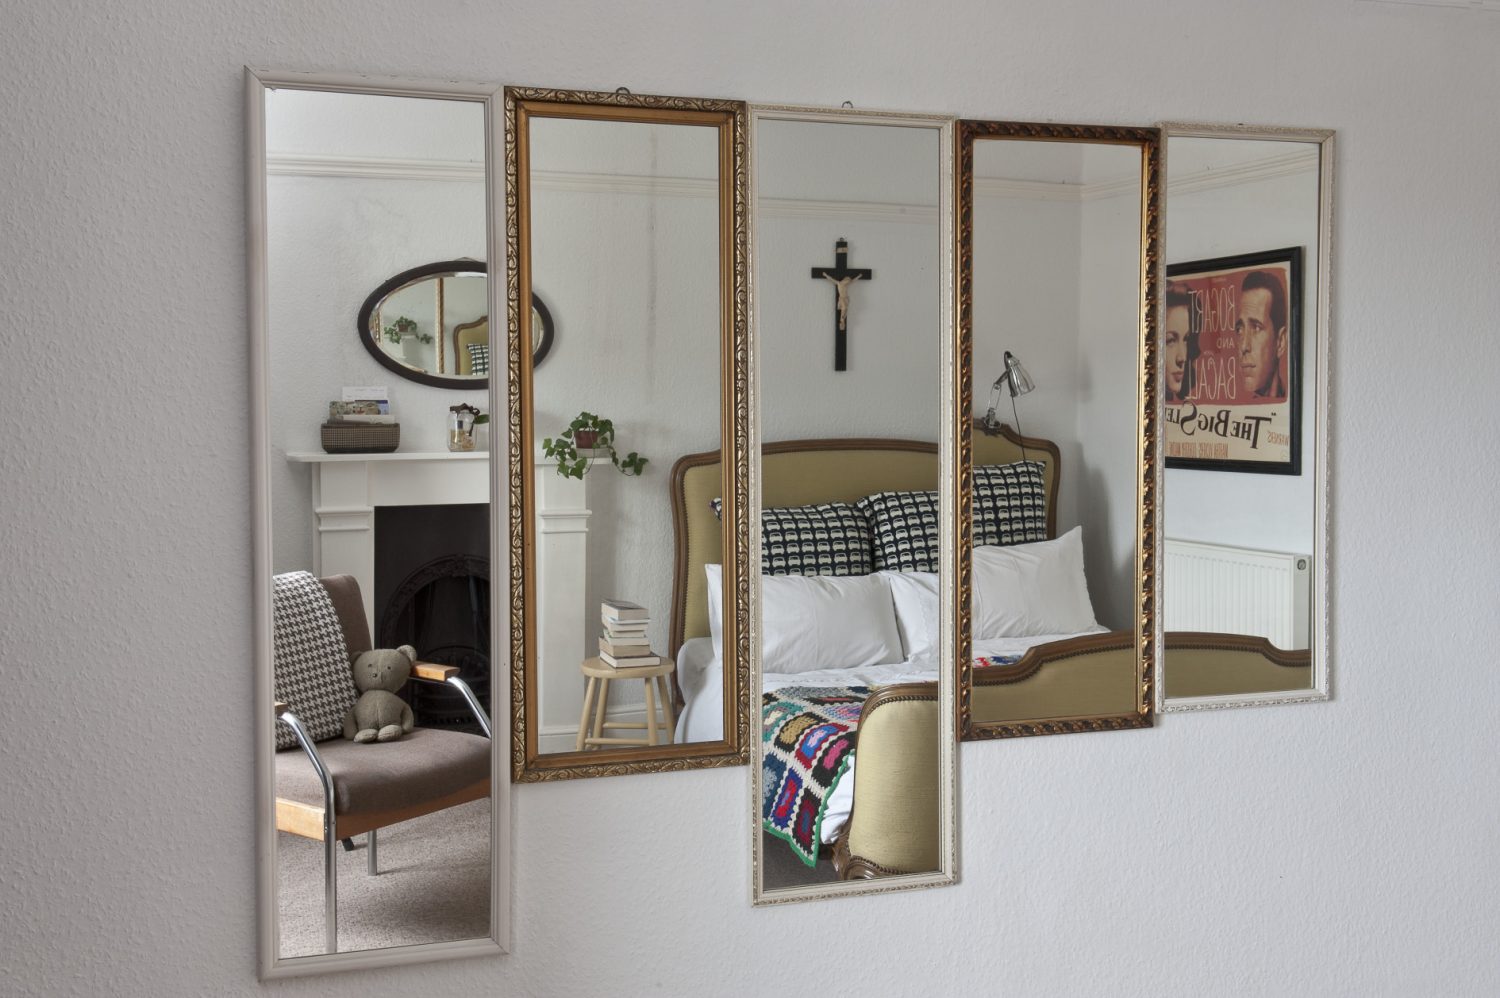 On the wall opposite there is a collection of five framed mirrors, all hung closely together so that they form a kind of panel